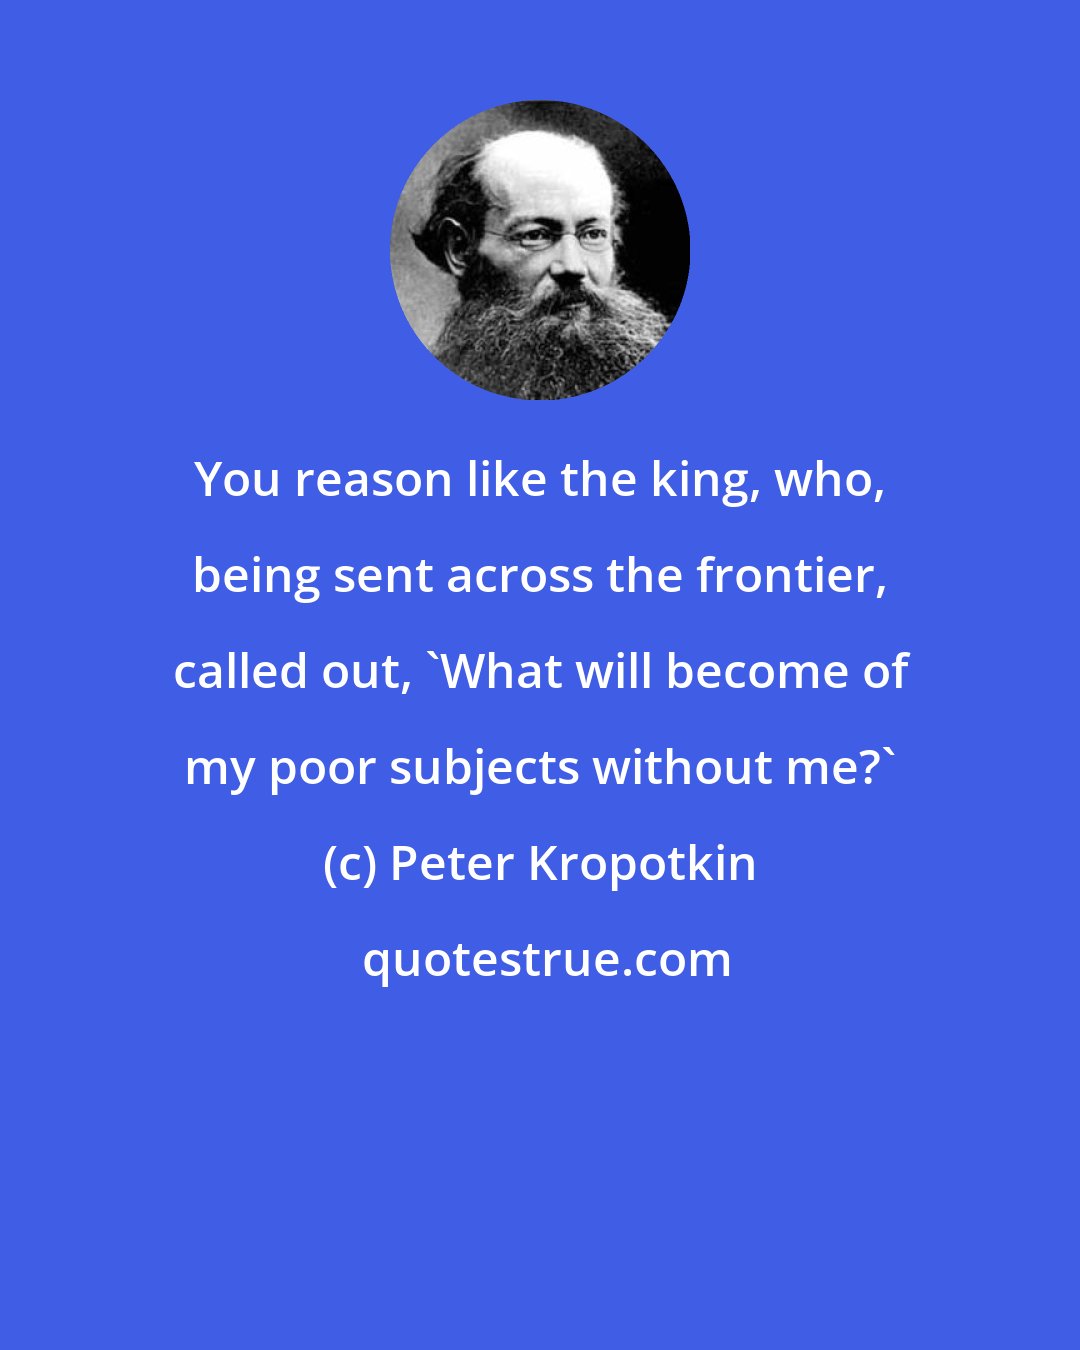 Peter Kropotkin: You reason like the king, who, being sent across the frontier, called out, 'What will become of my poor subjects without me?'